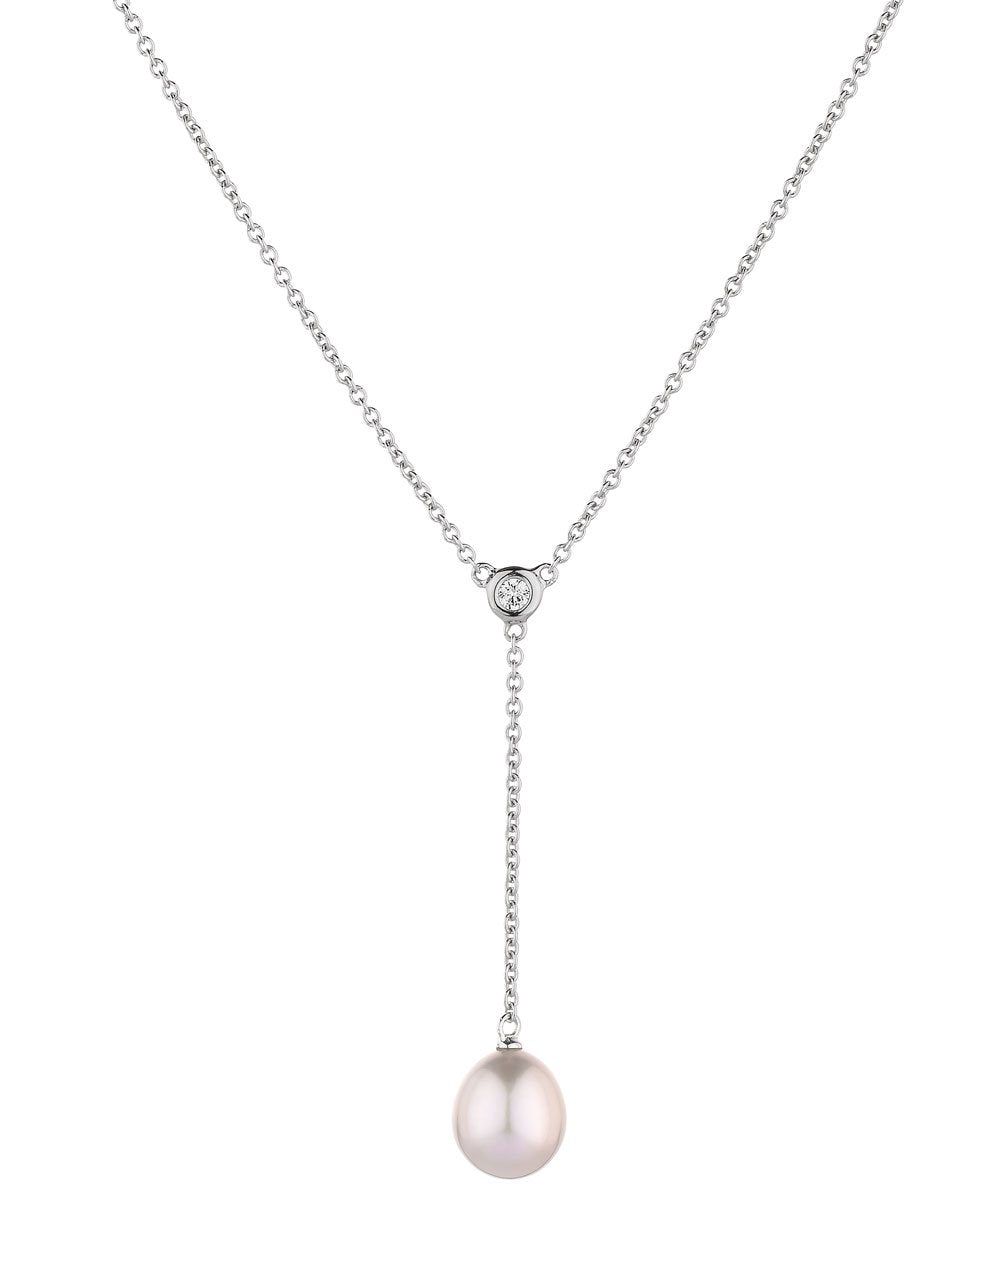 Cultured freshwater pearl drop necklace in sterling silver